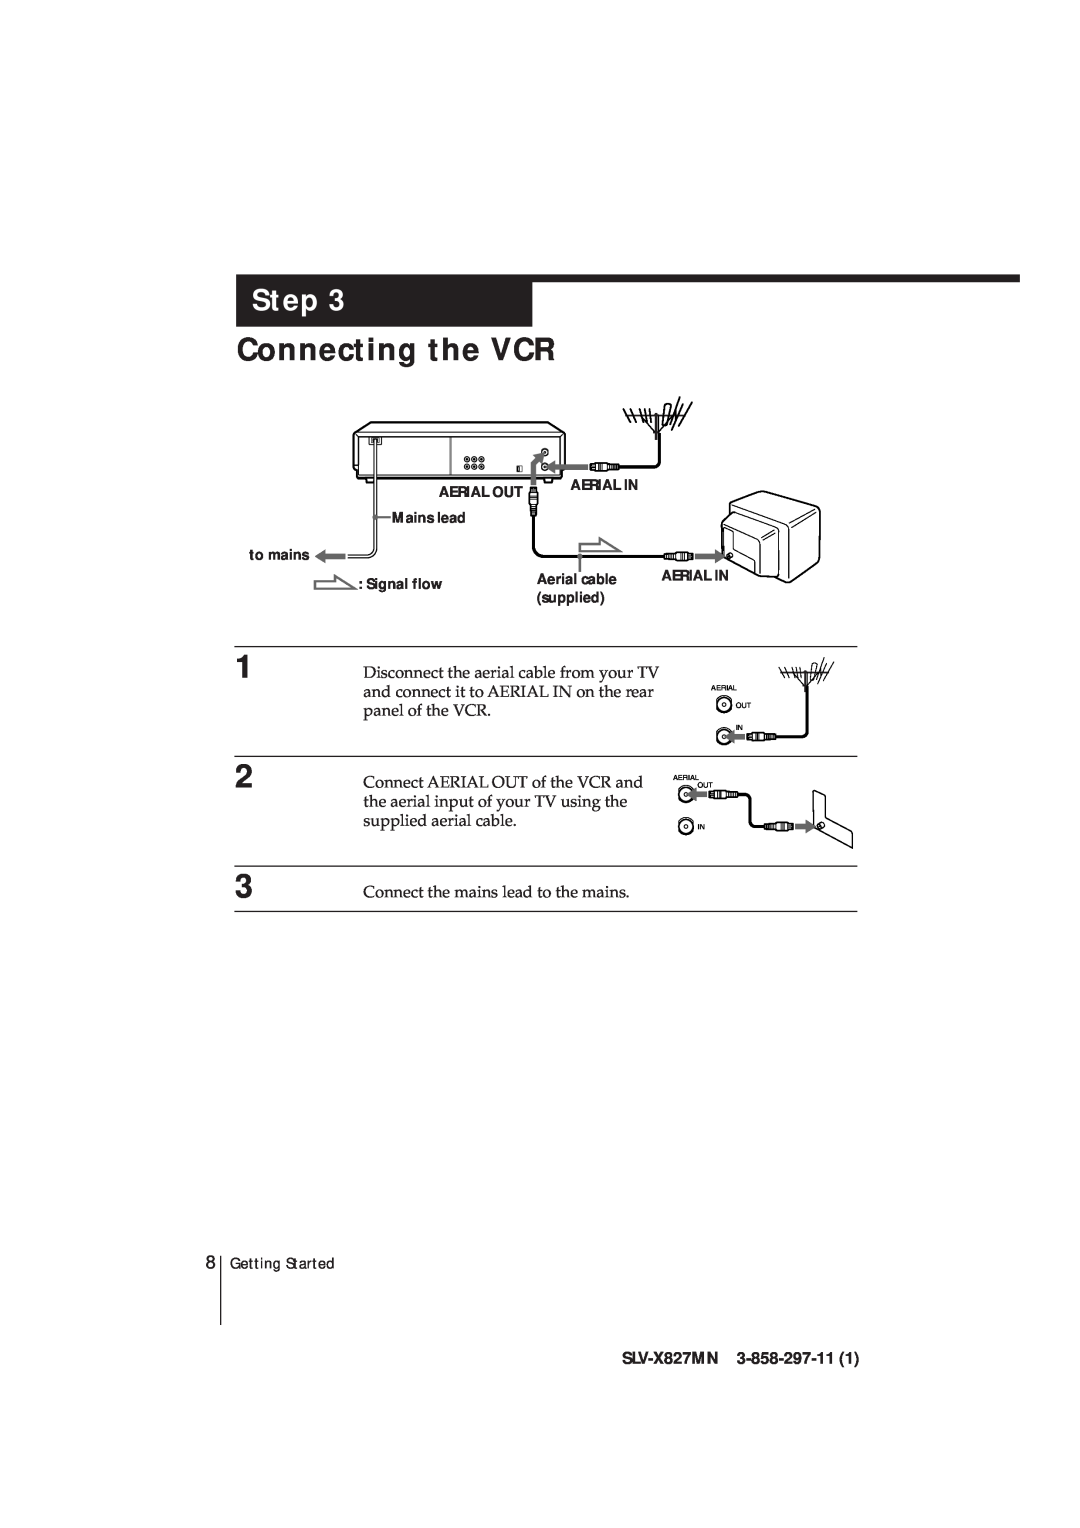 Sony manual Connecting the VCR, Step, SLV-X827MN 3-858-297-11, Aerial Out, Aerial In, Mains lead, to mains, Signal flow 